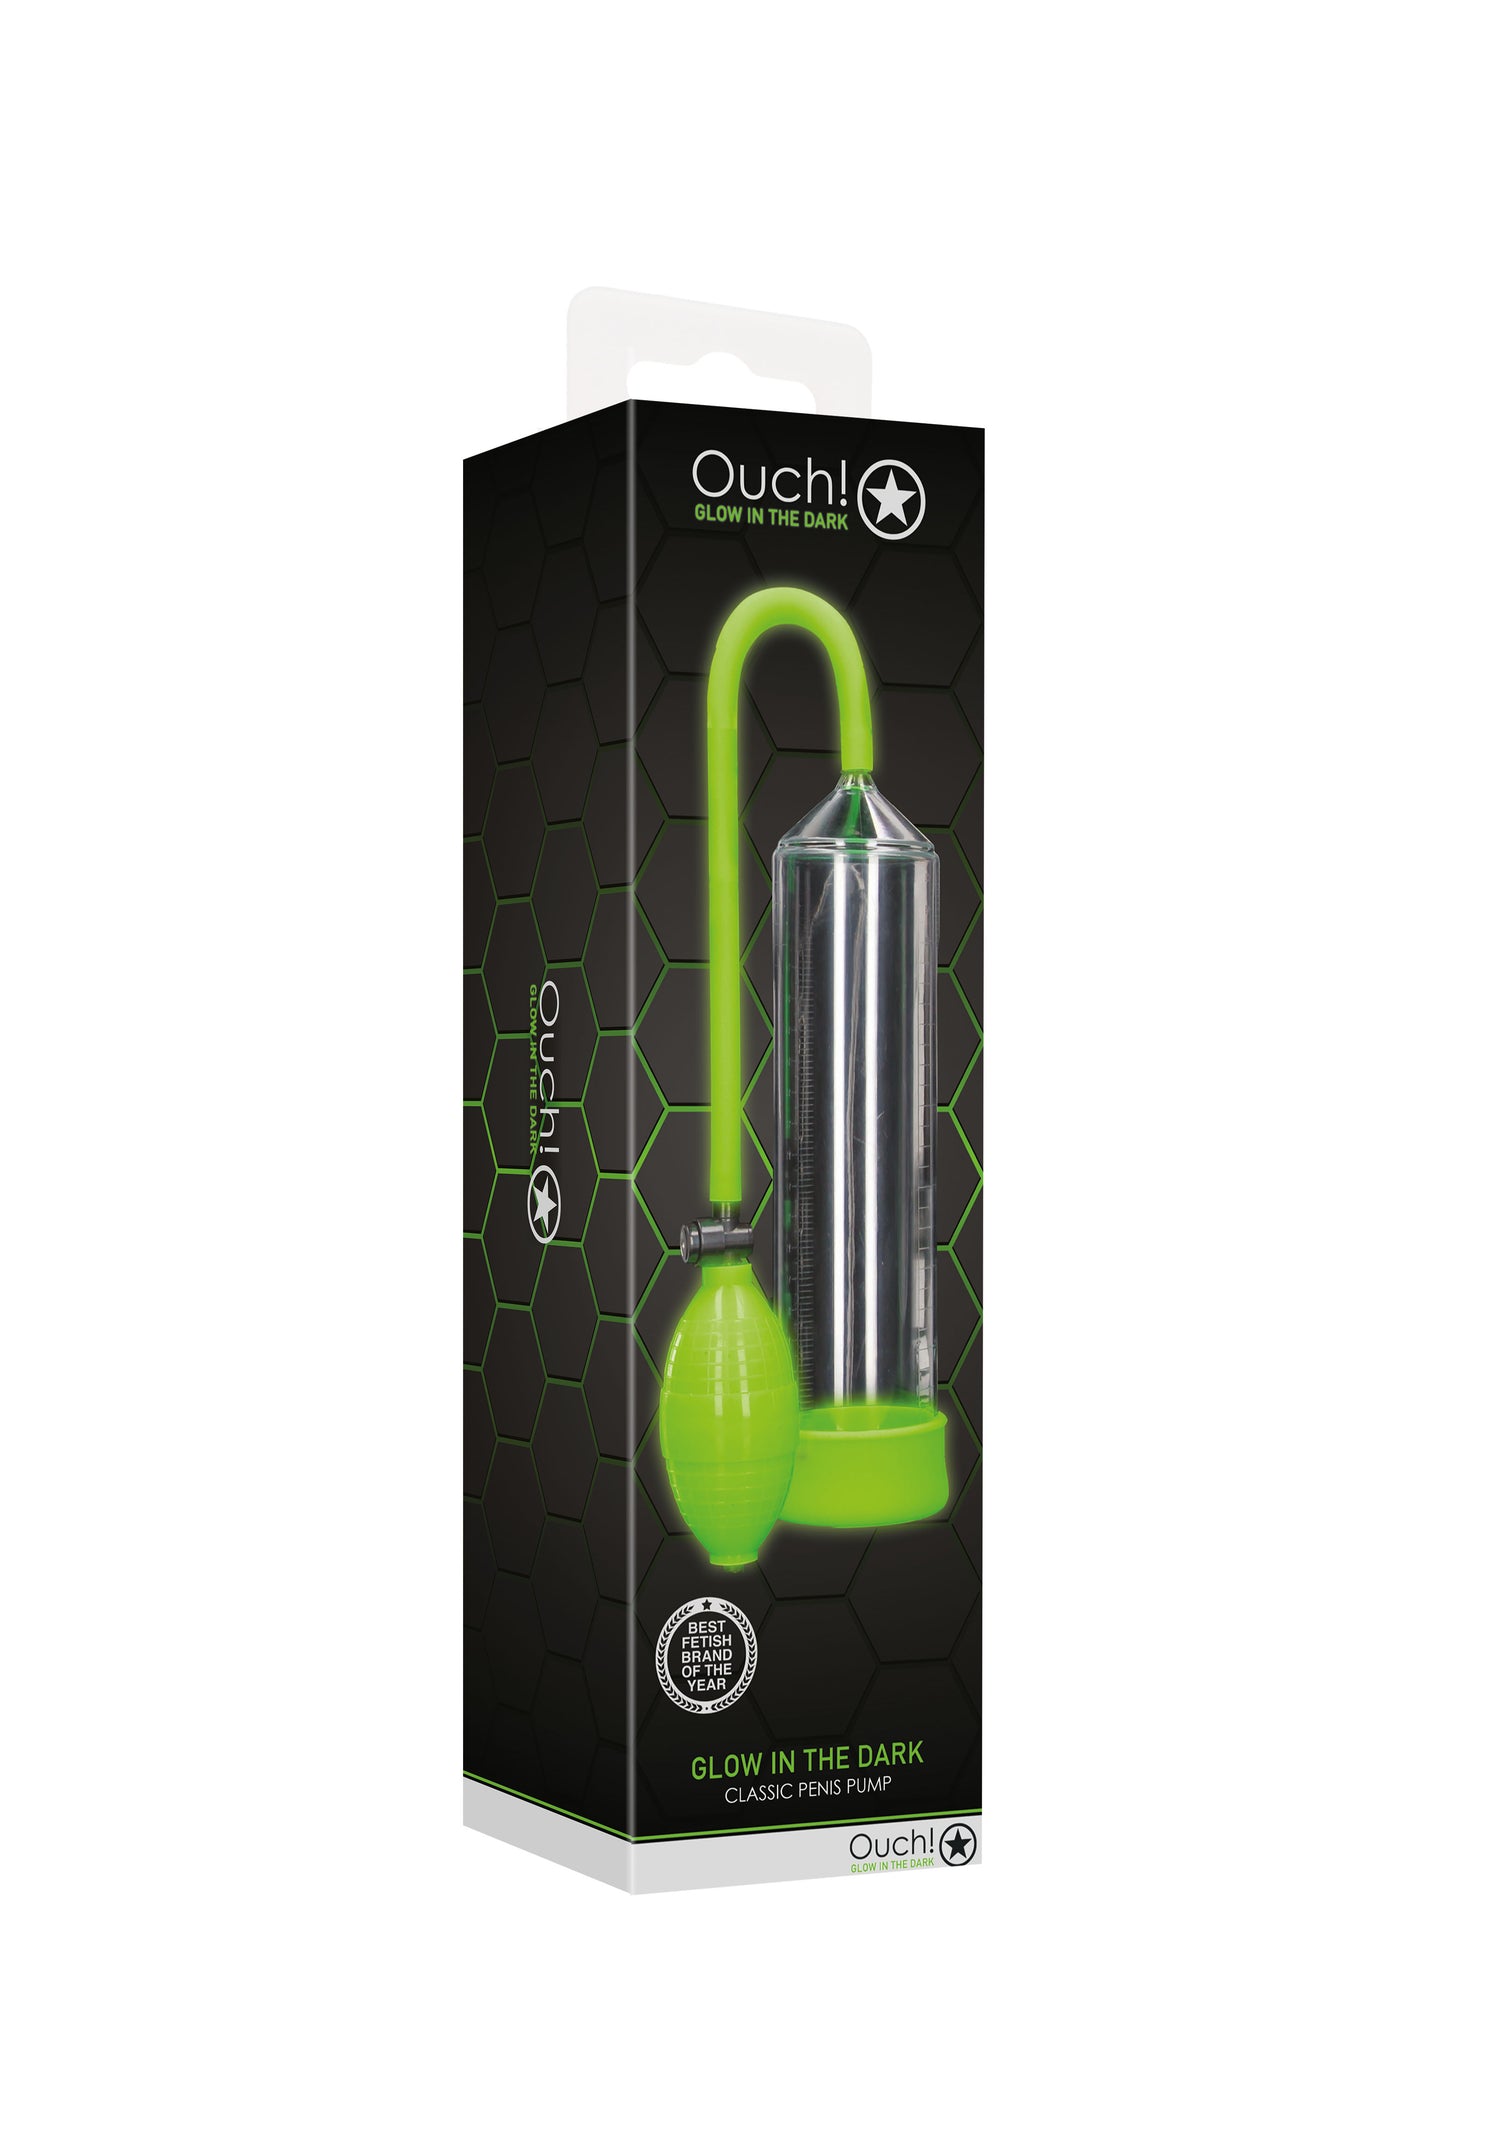 Ouch! Classic Penis Pump - Glow in the Dark